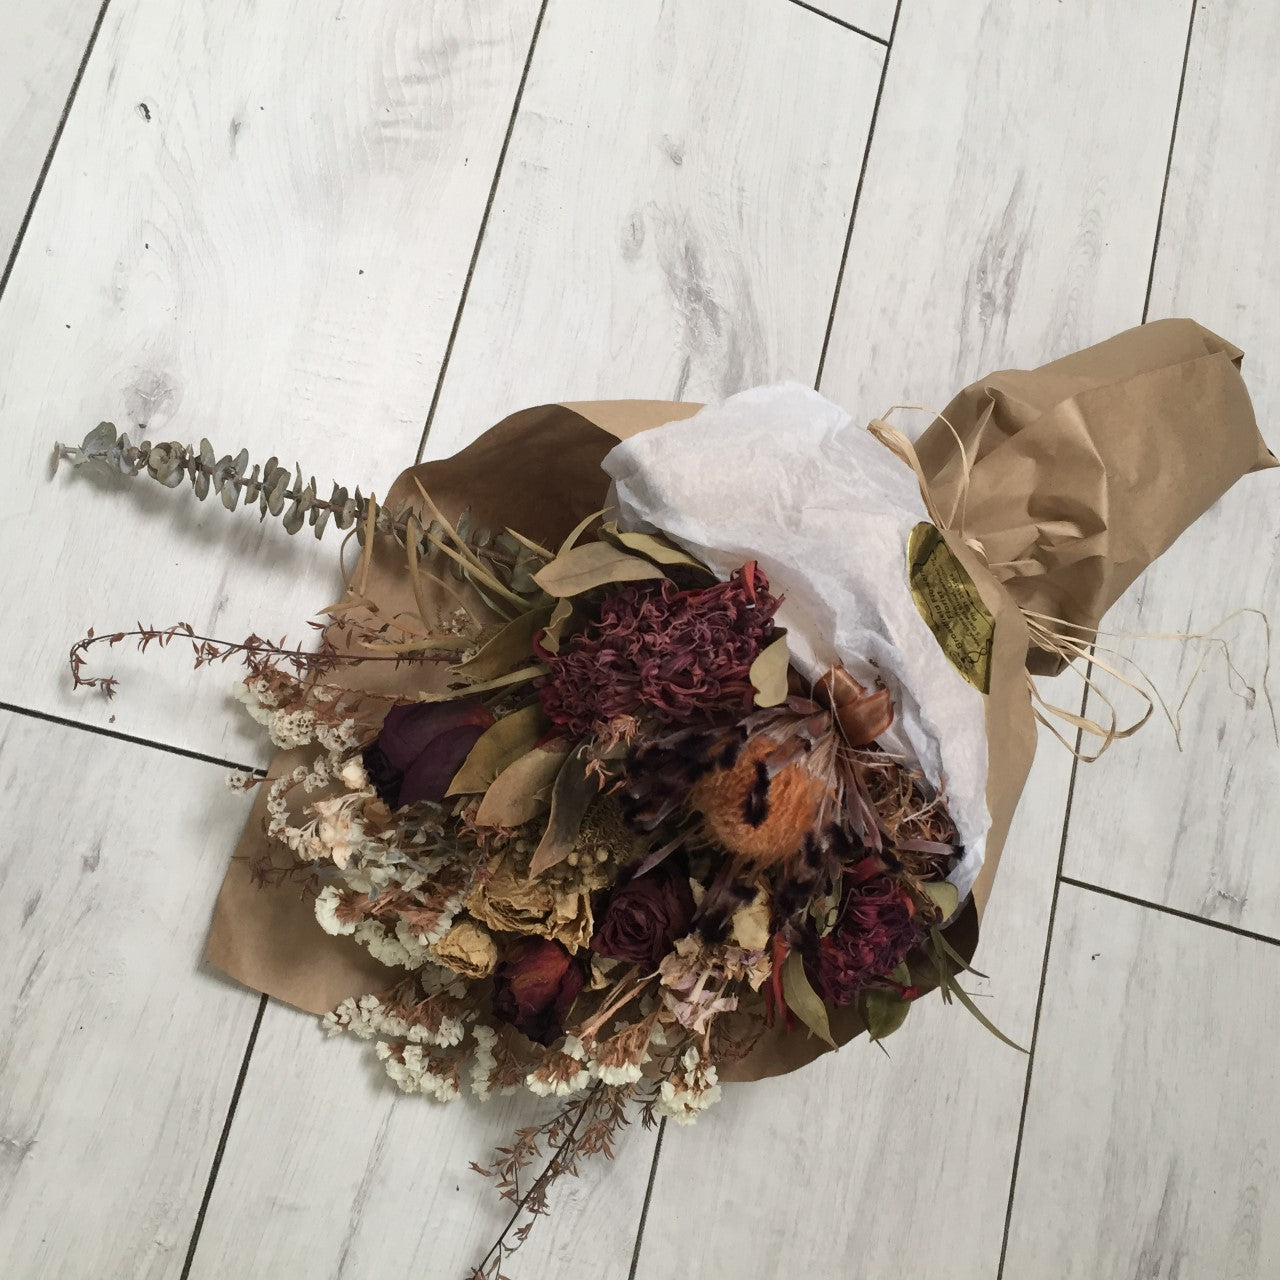 Dried Flower Bouquet. Flowers included, proteas, statice, roses, gum